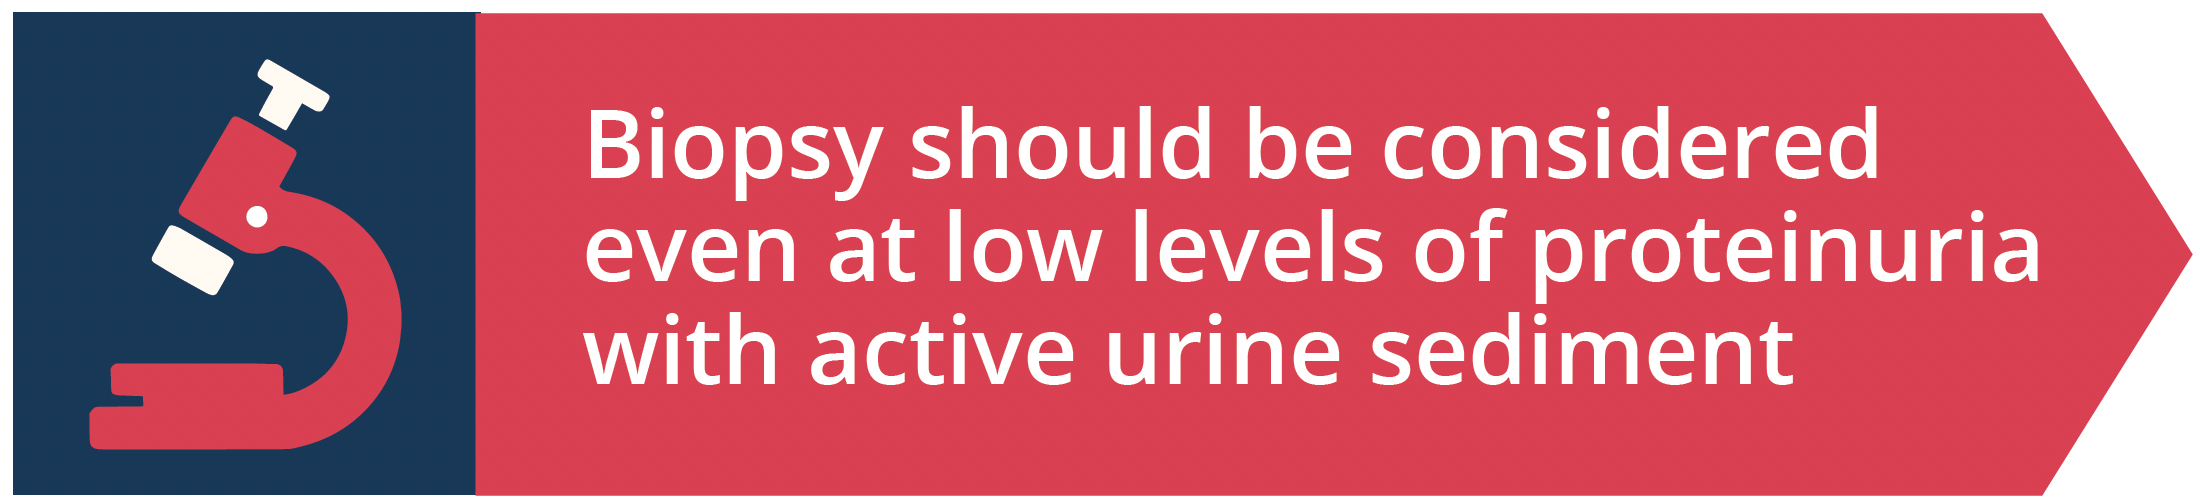 Biospy should be considered even at low levels of proteinuria with active urine sediment